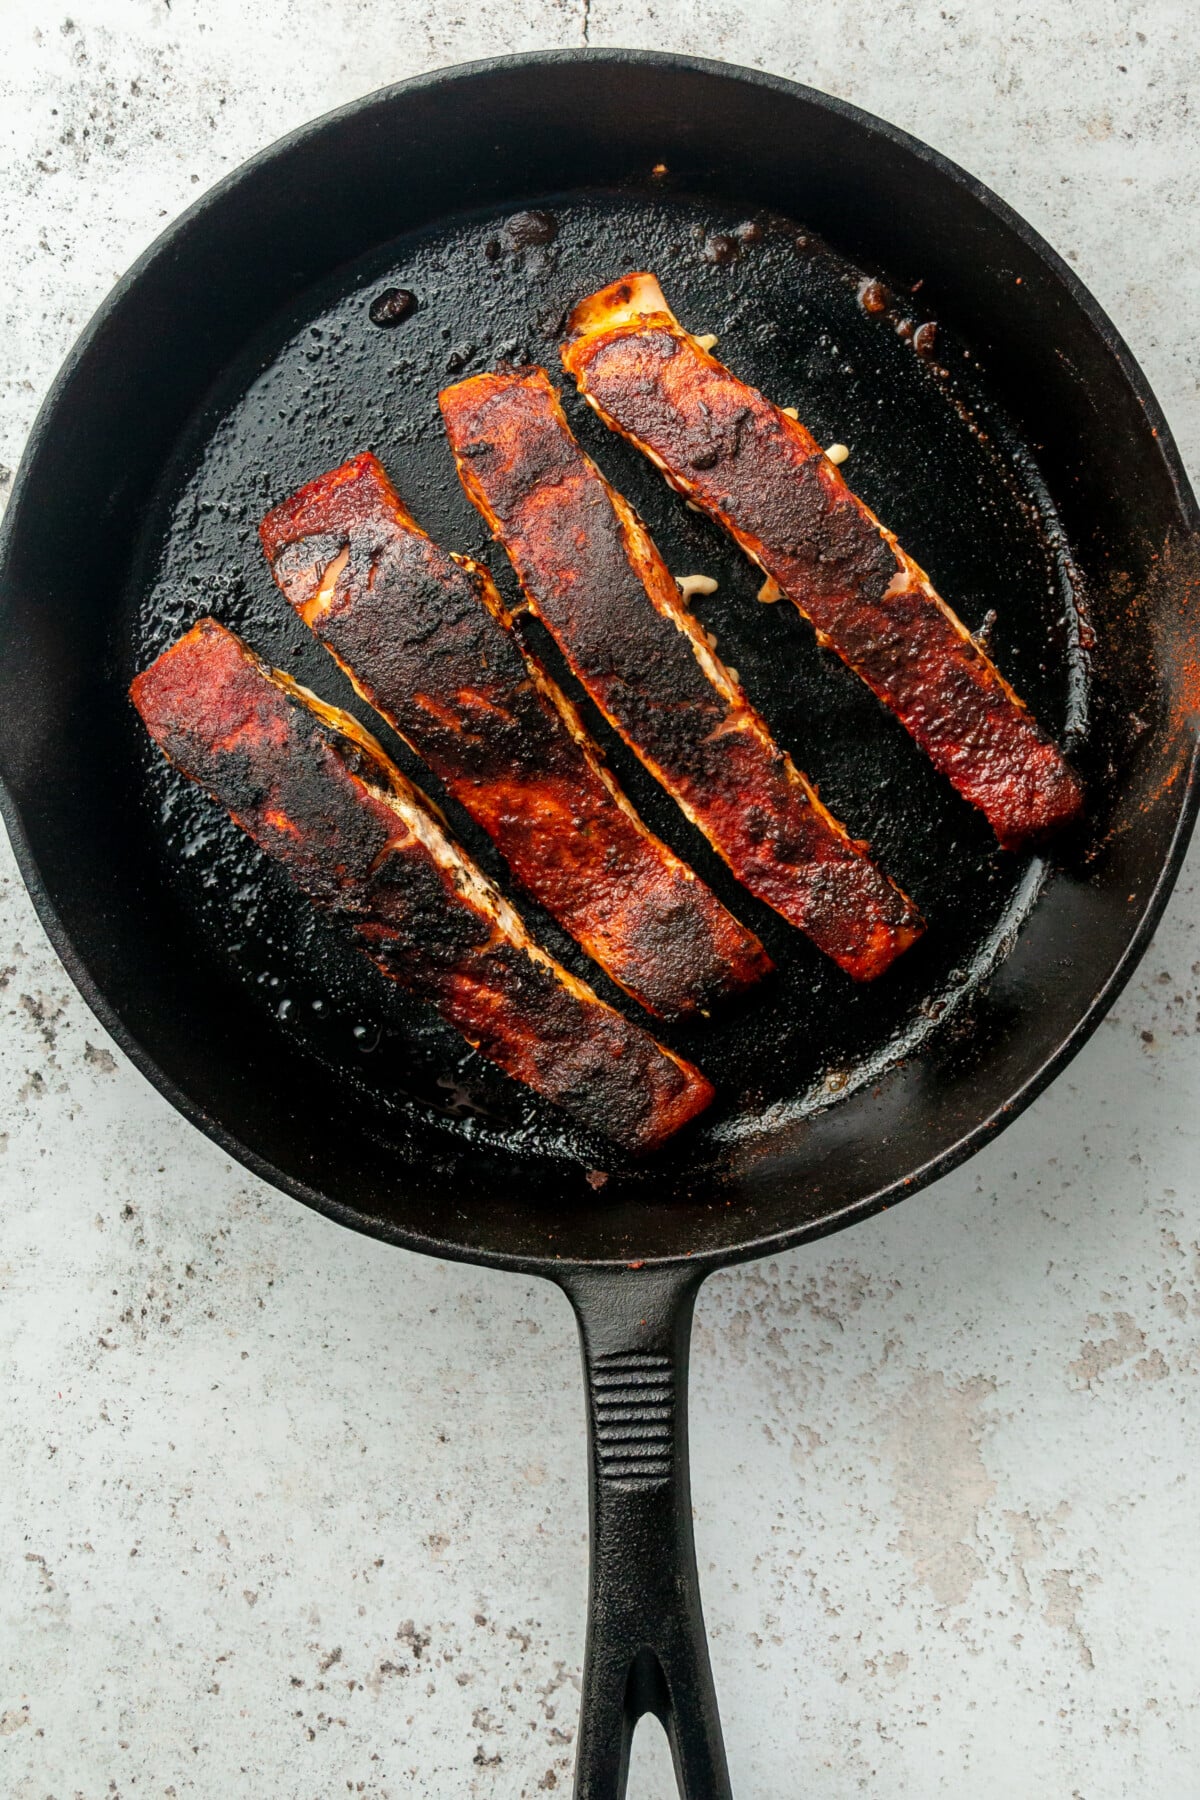 Blackened salmon sits in a cast iron skillet on a light grey colored surface.